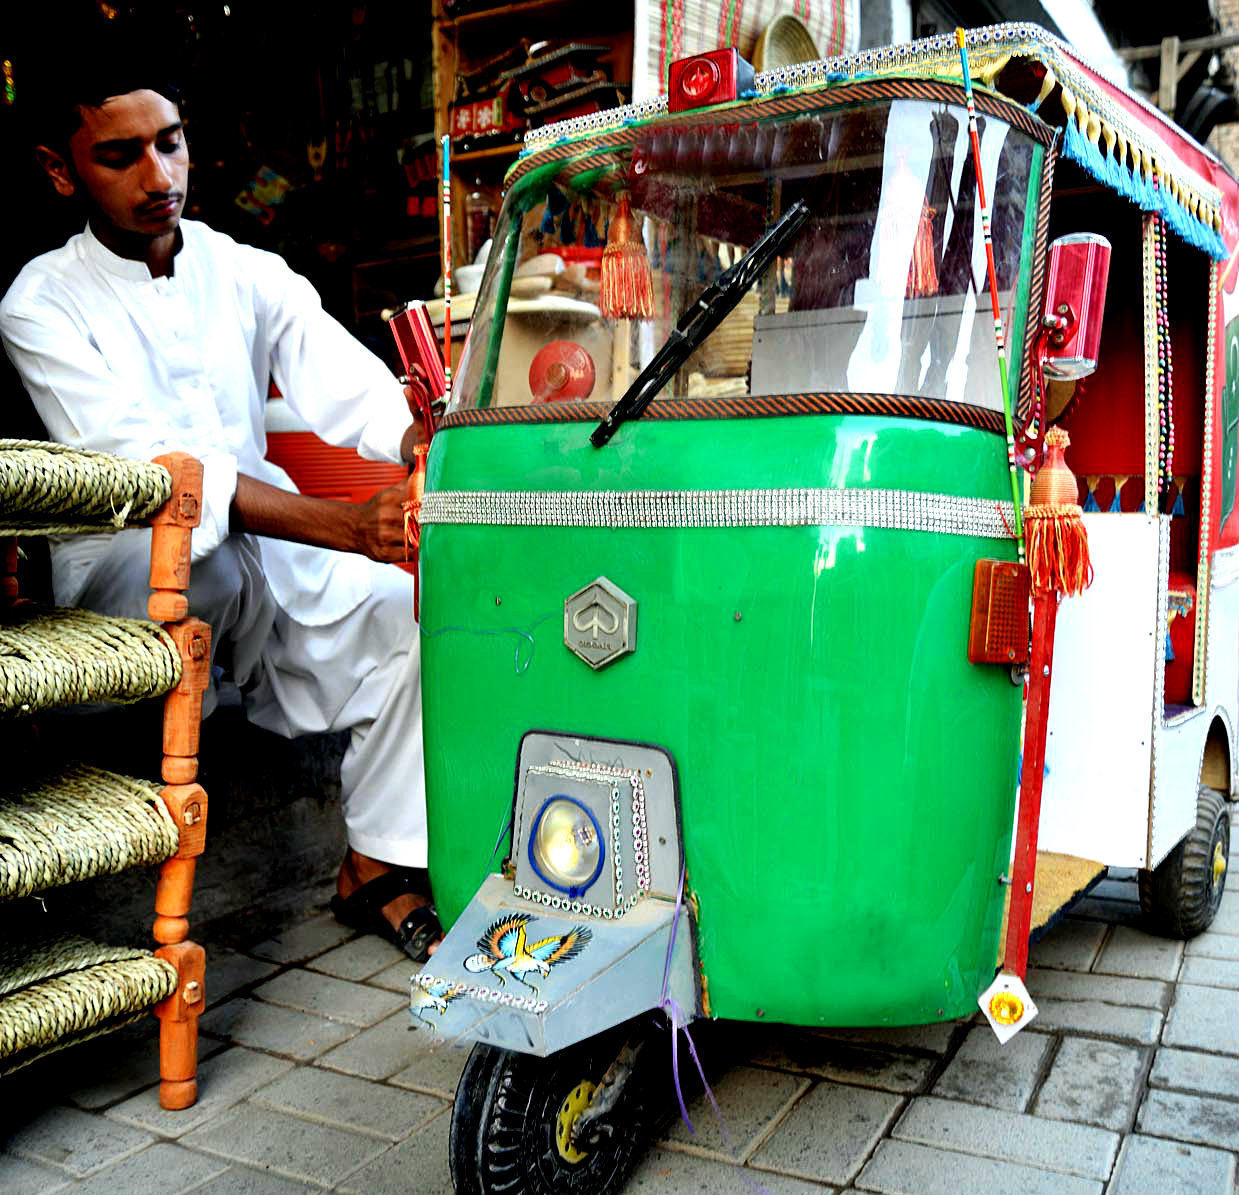 A Young Artisan Seen Giving Final Touches To A Model Of Auto Rickshaw